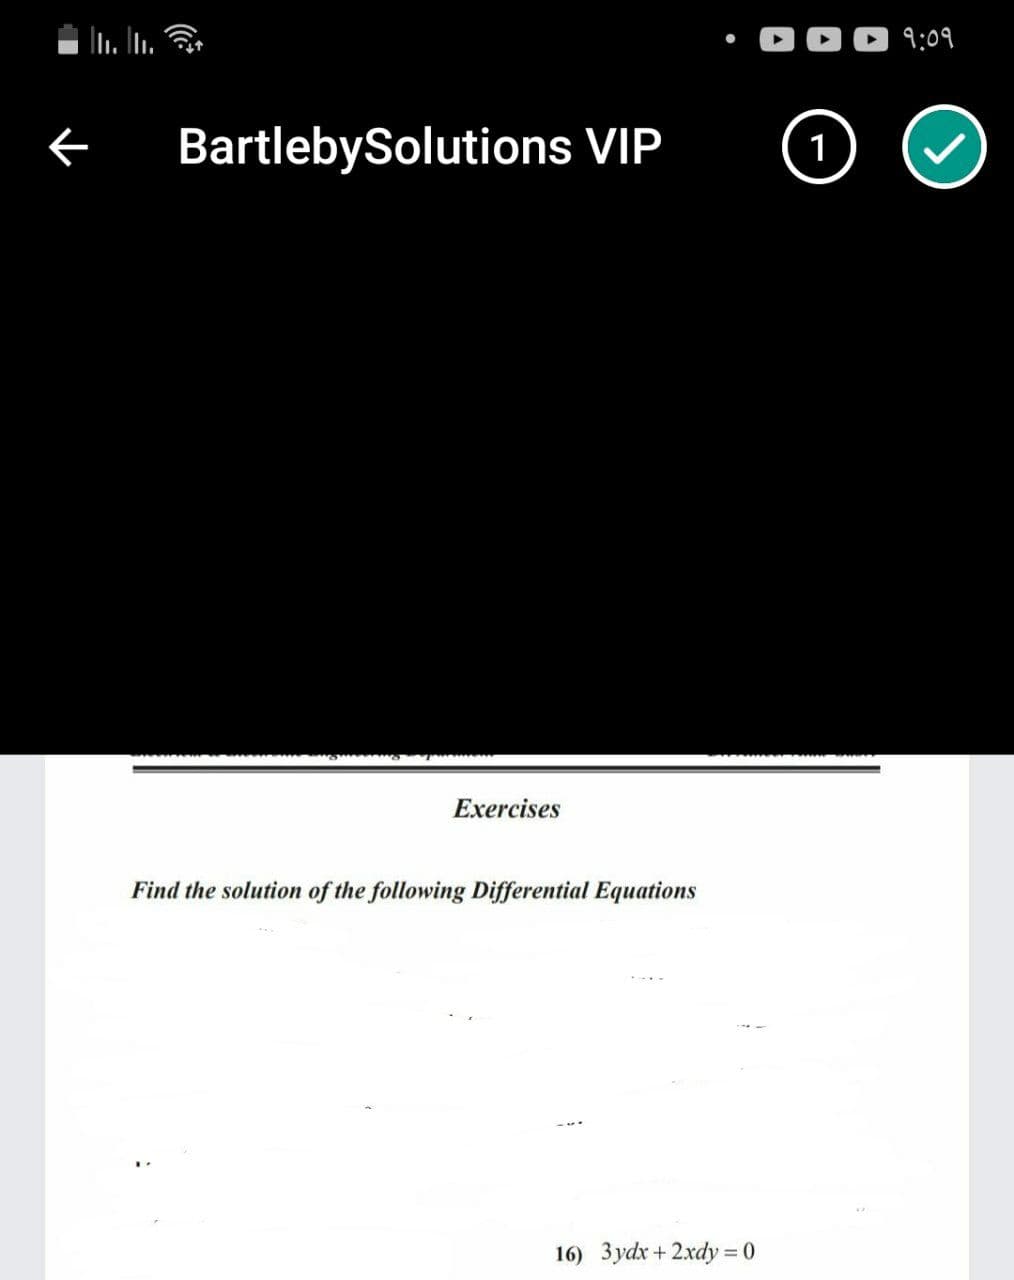 O00 9:09
BartlebySolutions VIP
1
Exercises
Find the solution of the following Differential Equations
16) 3ydx + 2xdy = 0
